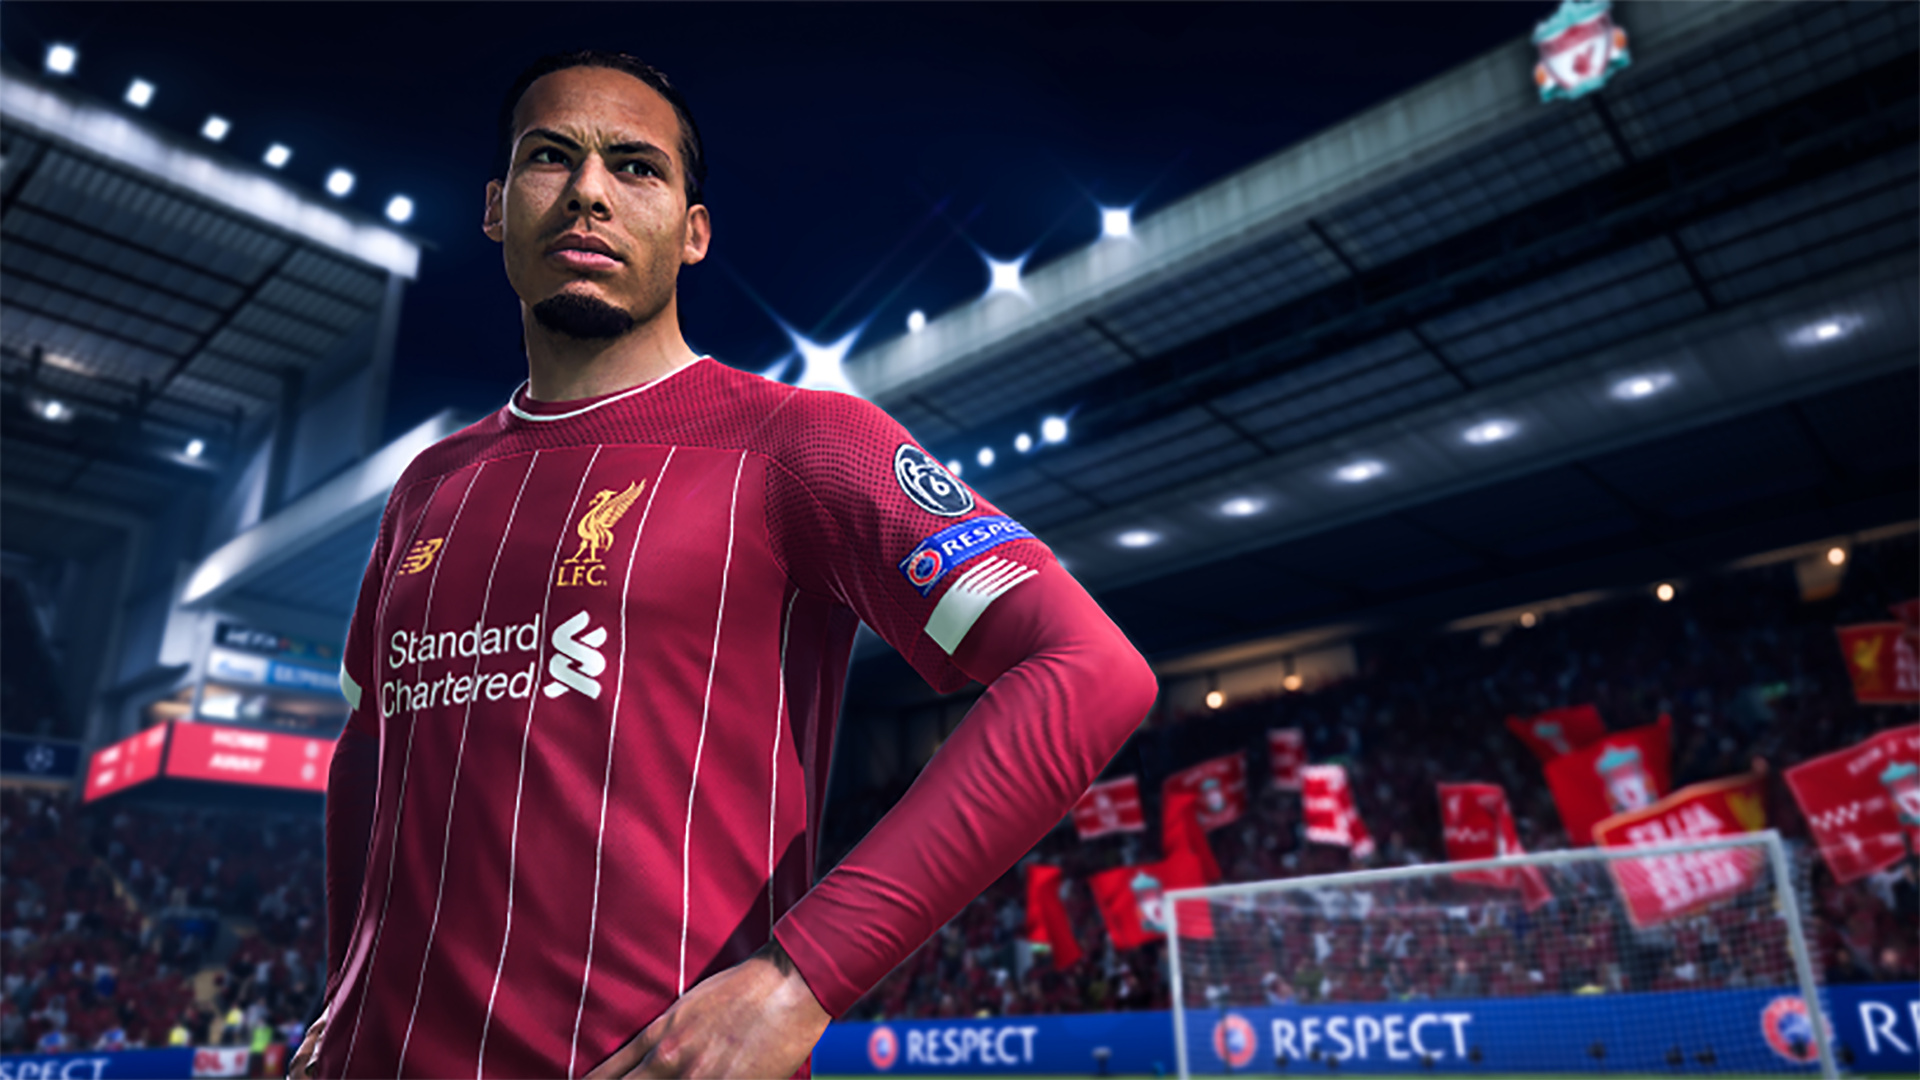 FIFA Soccer (Game): Released in 2019, The first in the franchise to not have an Xbox 360 version. 1920x1080 Full HD Background.